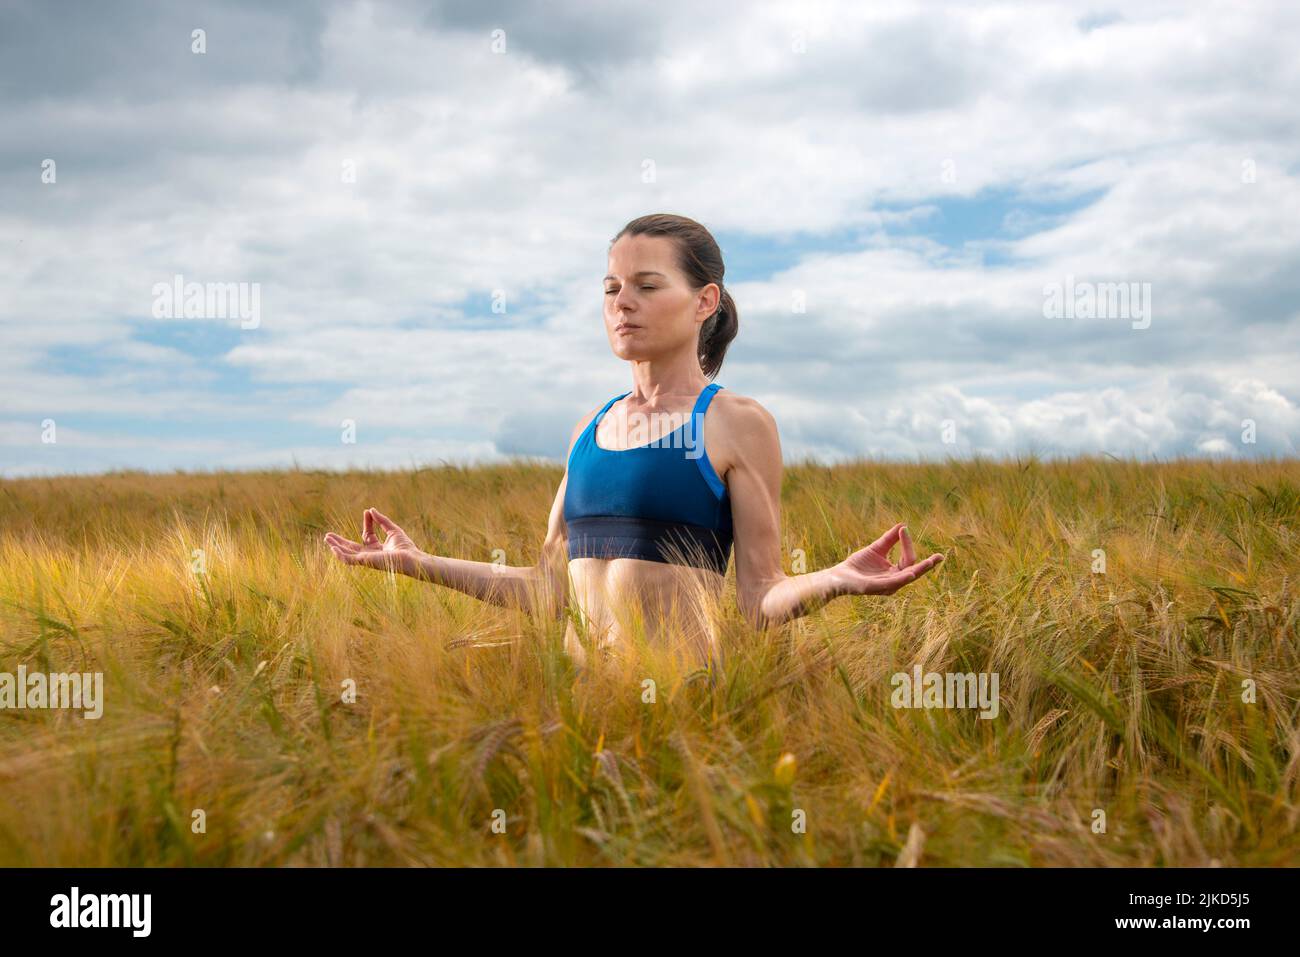 Attractive woman meditating and practicing yoga in a field. Stock Photo